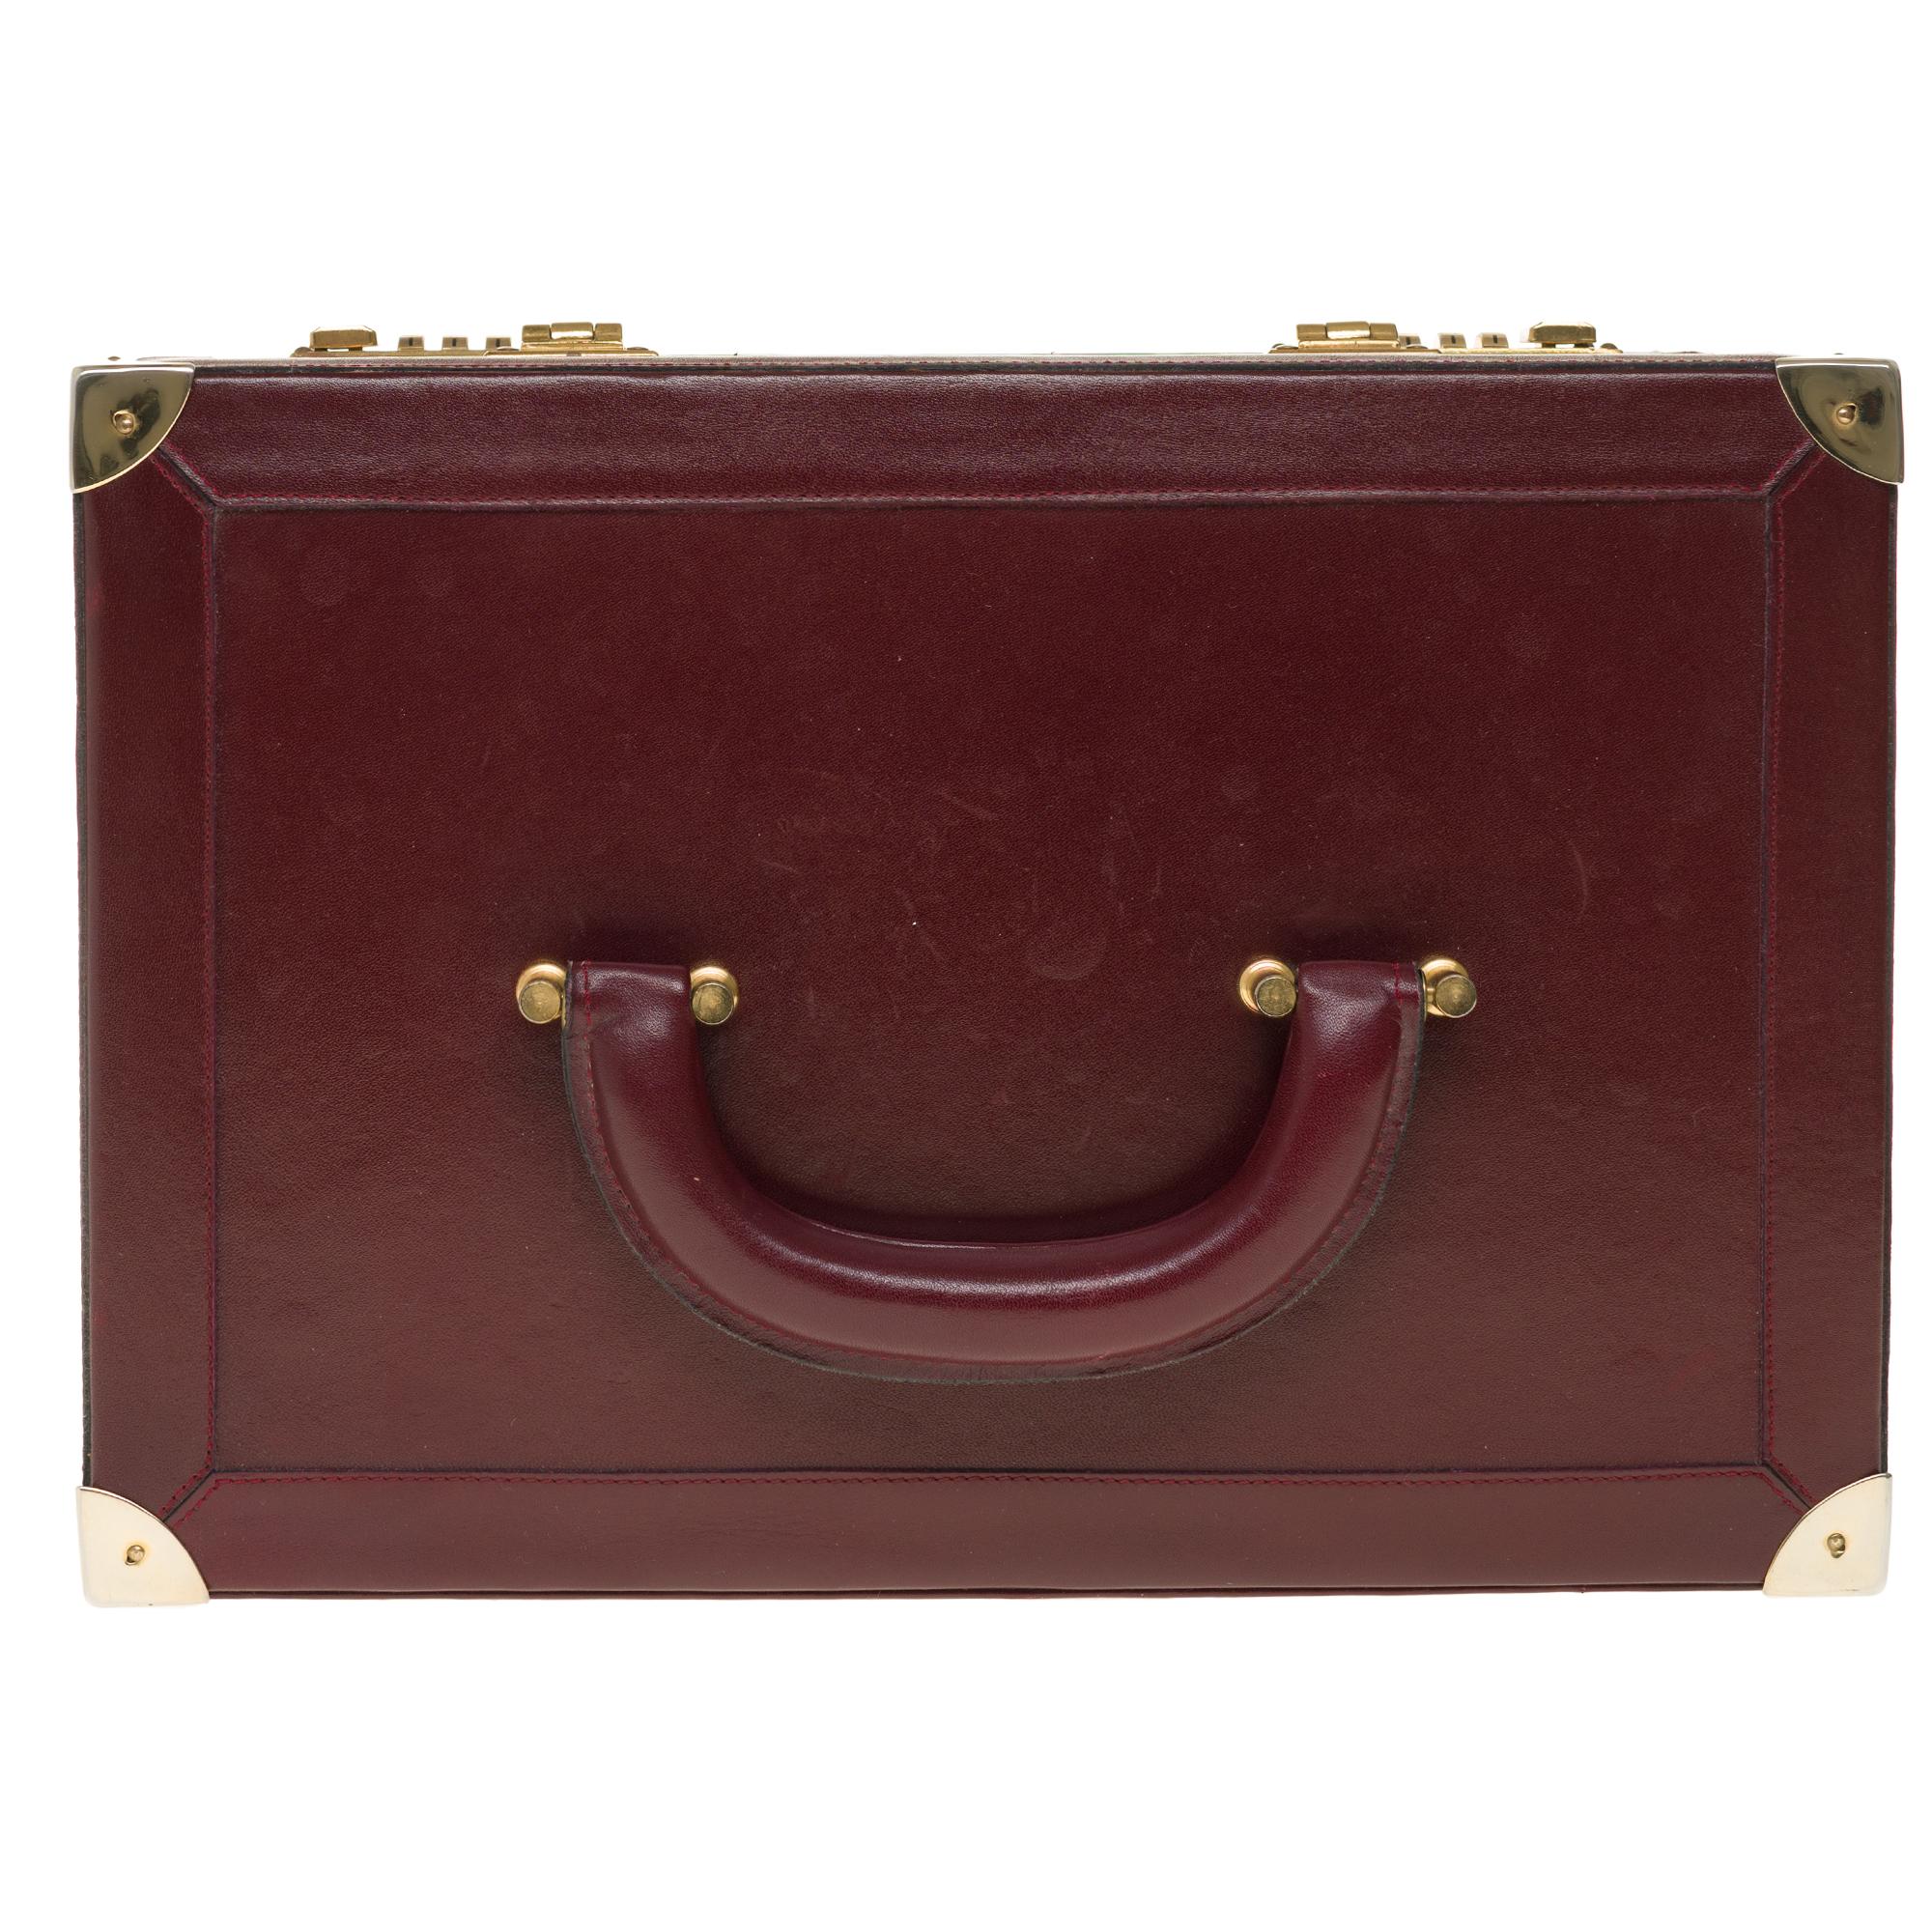 Beautiful Vintage Vanity Case Cartier in burgundy leather and brass  1